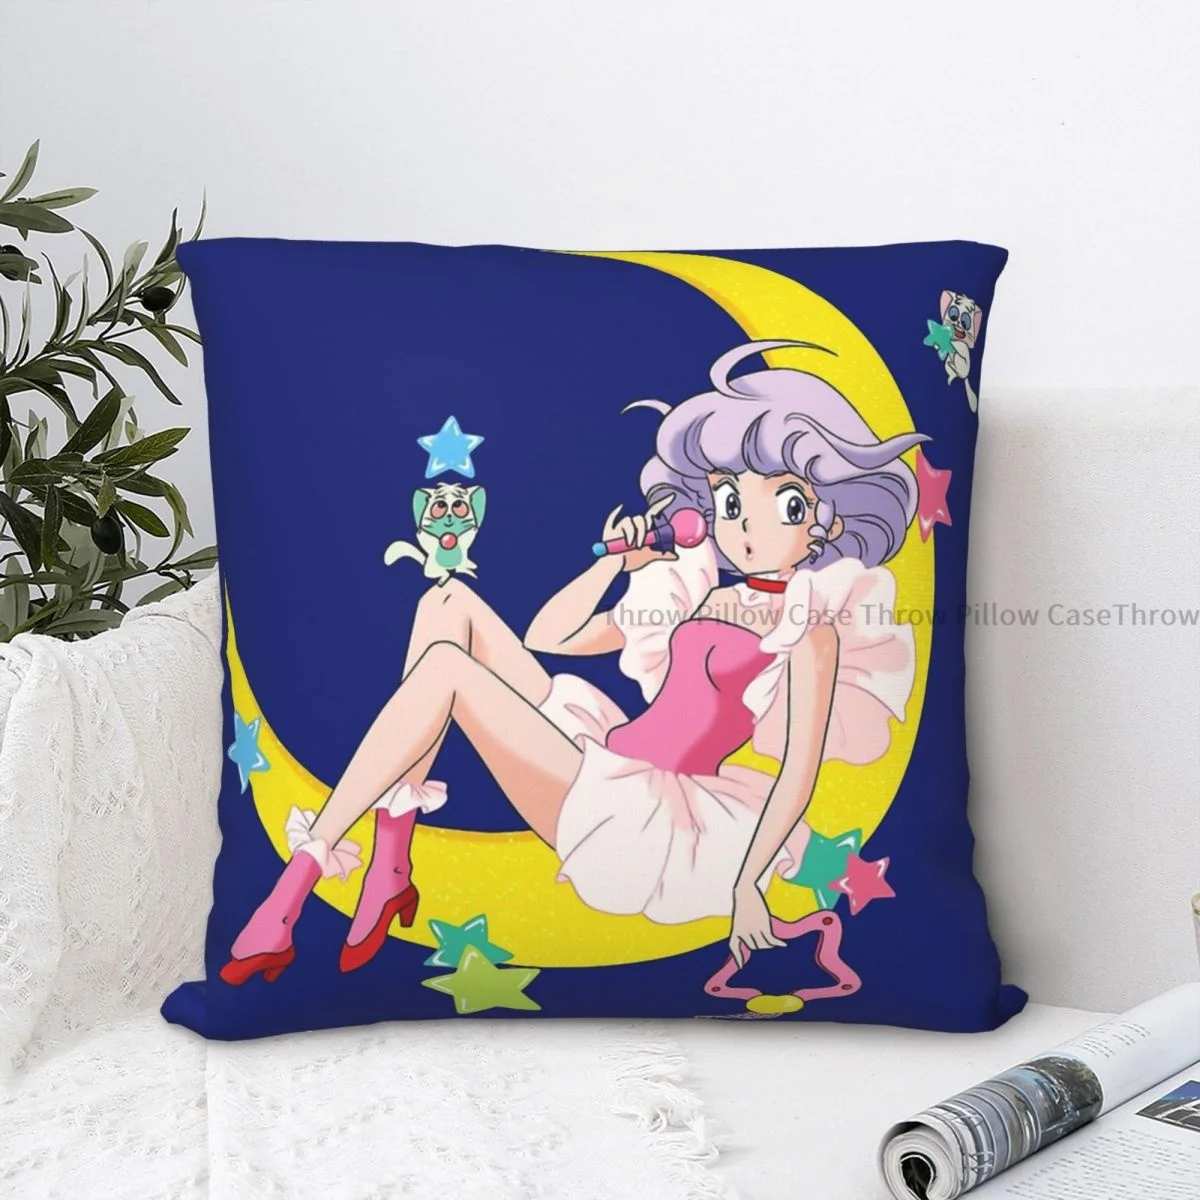 At Night Moon Cojines Creamy Mami Cartoon Throw Pillow Case Cushion Covers Home Sofa Chair Decorative Backpack